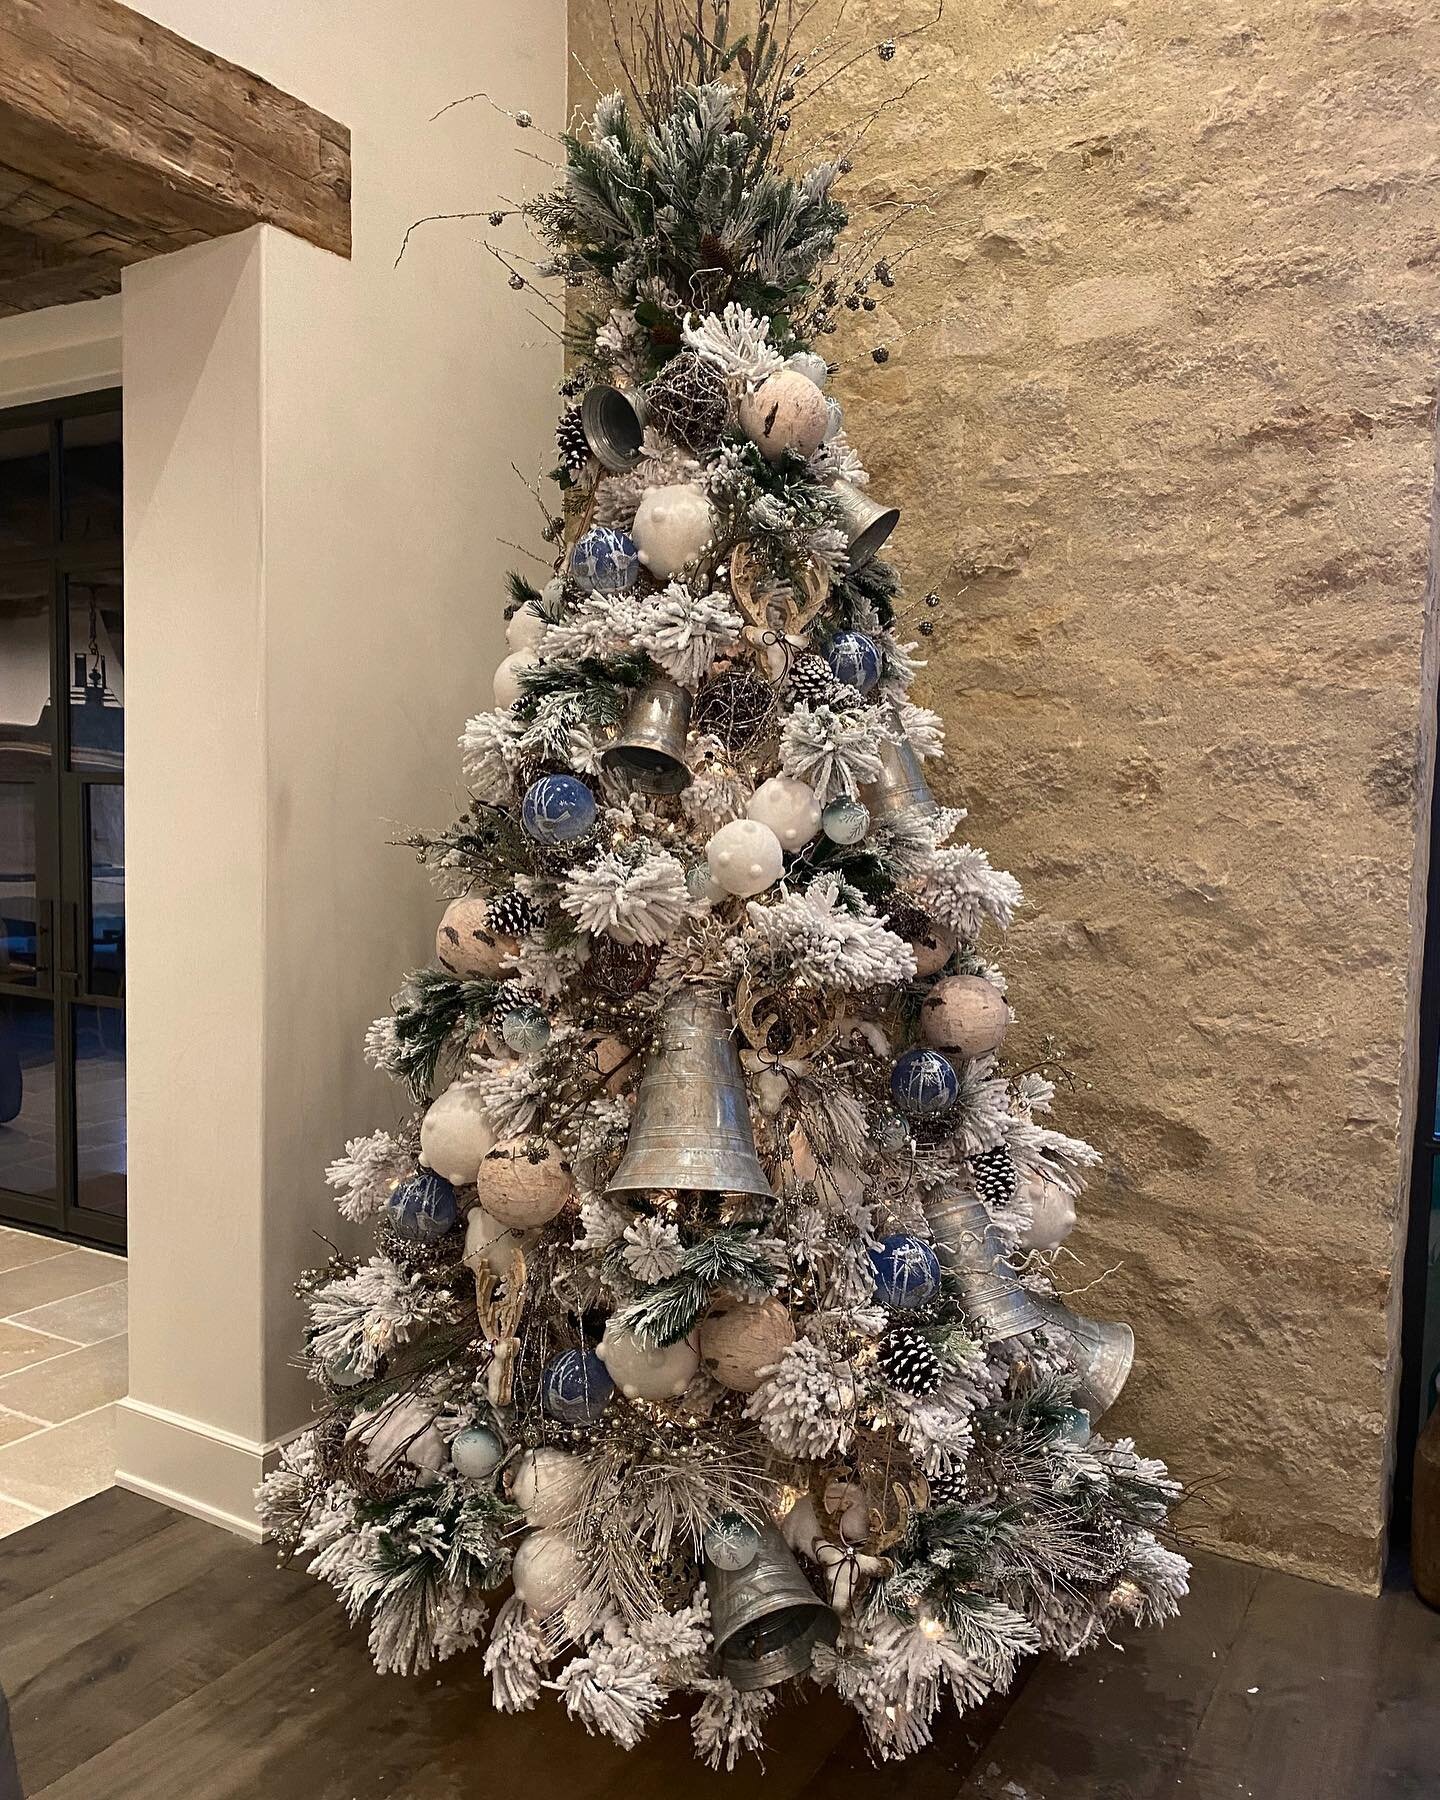 Spreading Christmas cheer one home at a time✨ Our team just wrapped up this beautiful Christmas install at our Houston Oaks project. ⁠🎄
⁠
⁠
⁠
#christmasdecor #interiordesign⁠
#christmaslights #christmastime #christmastree #christmasdecorations #holi